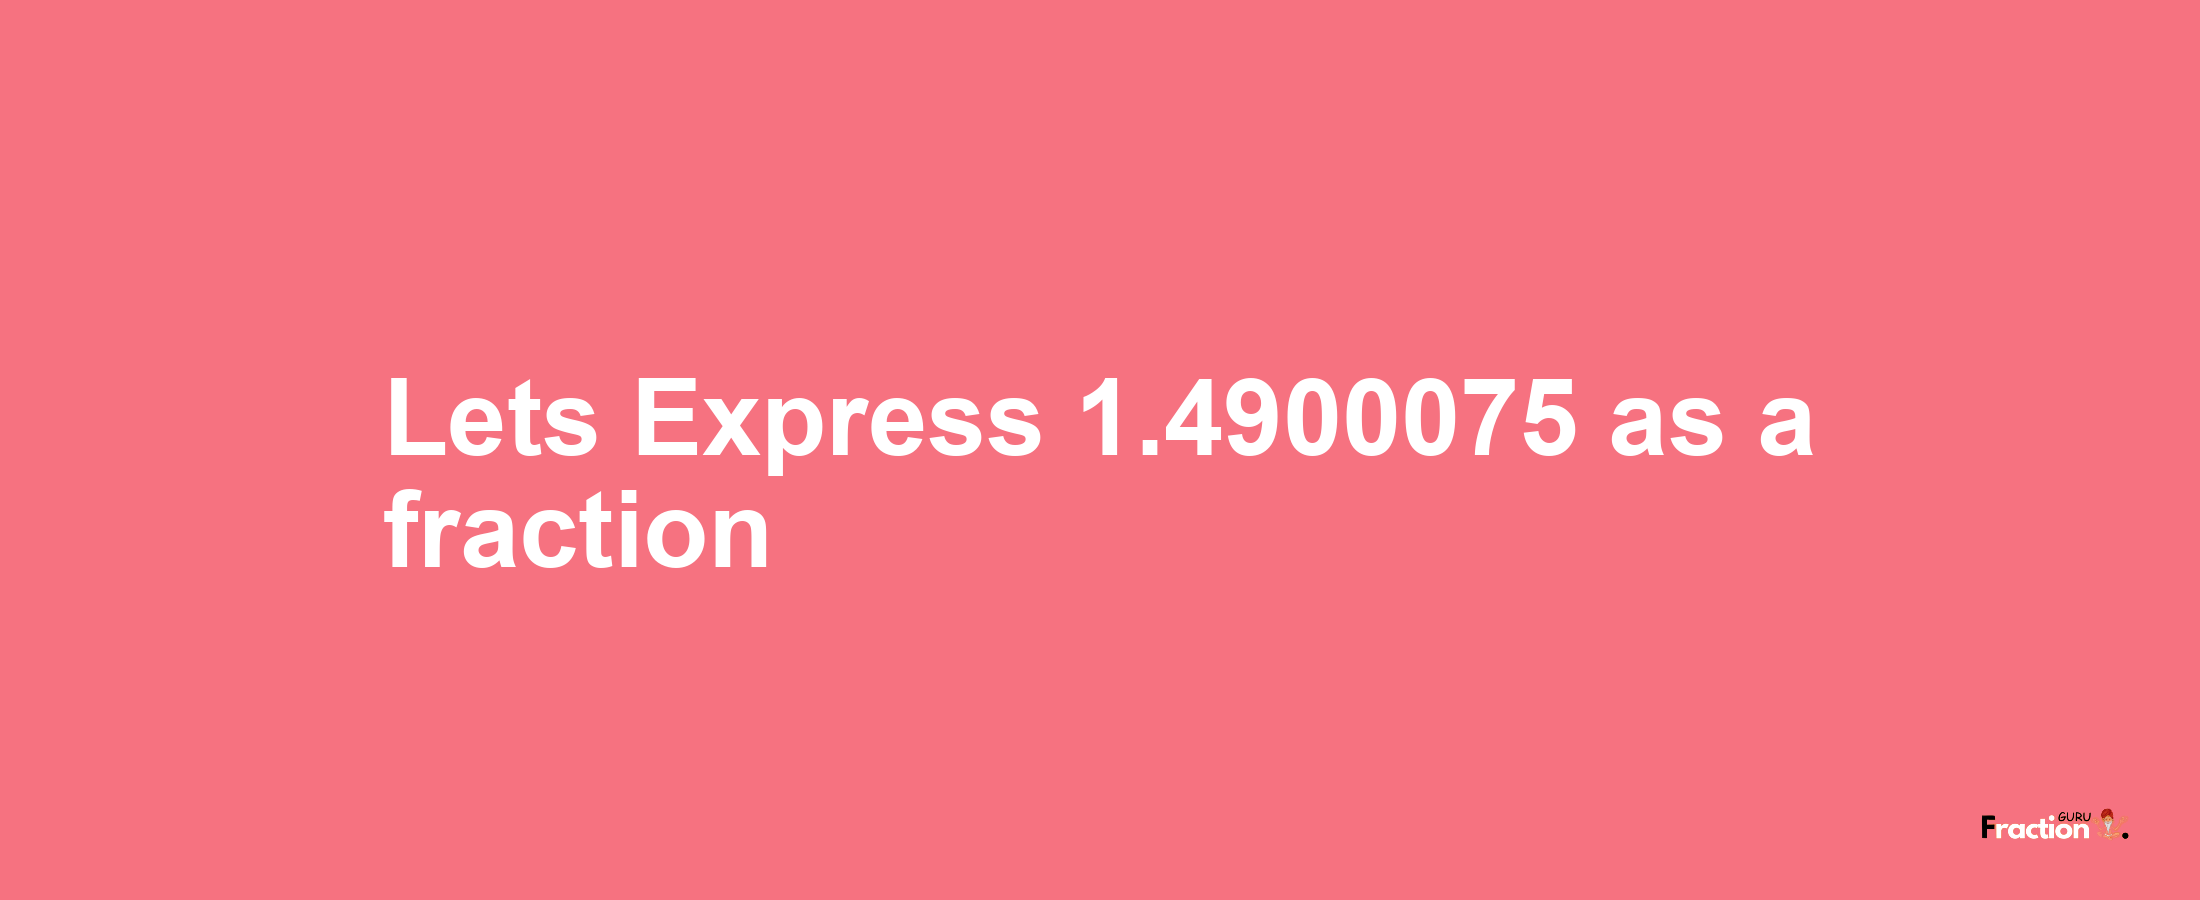 Lets Express 1.4900075 as afraction